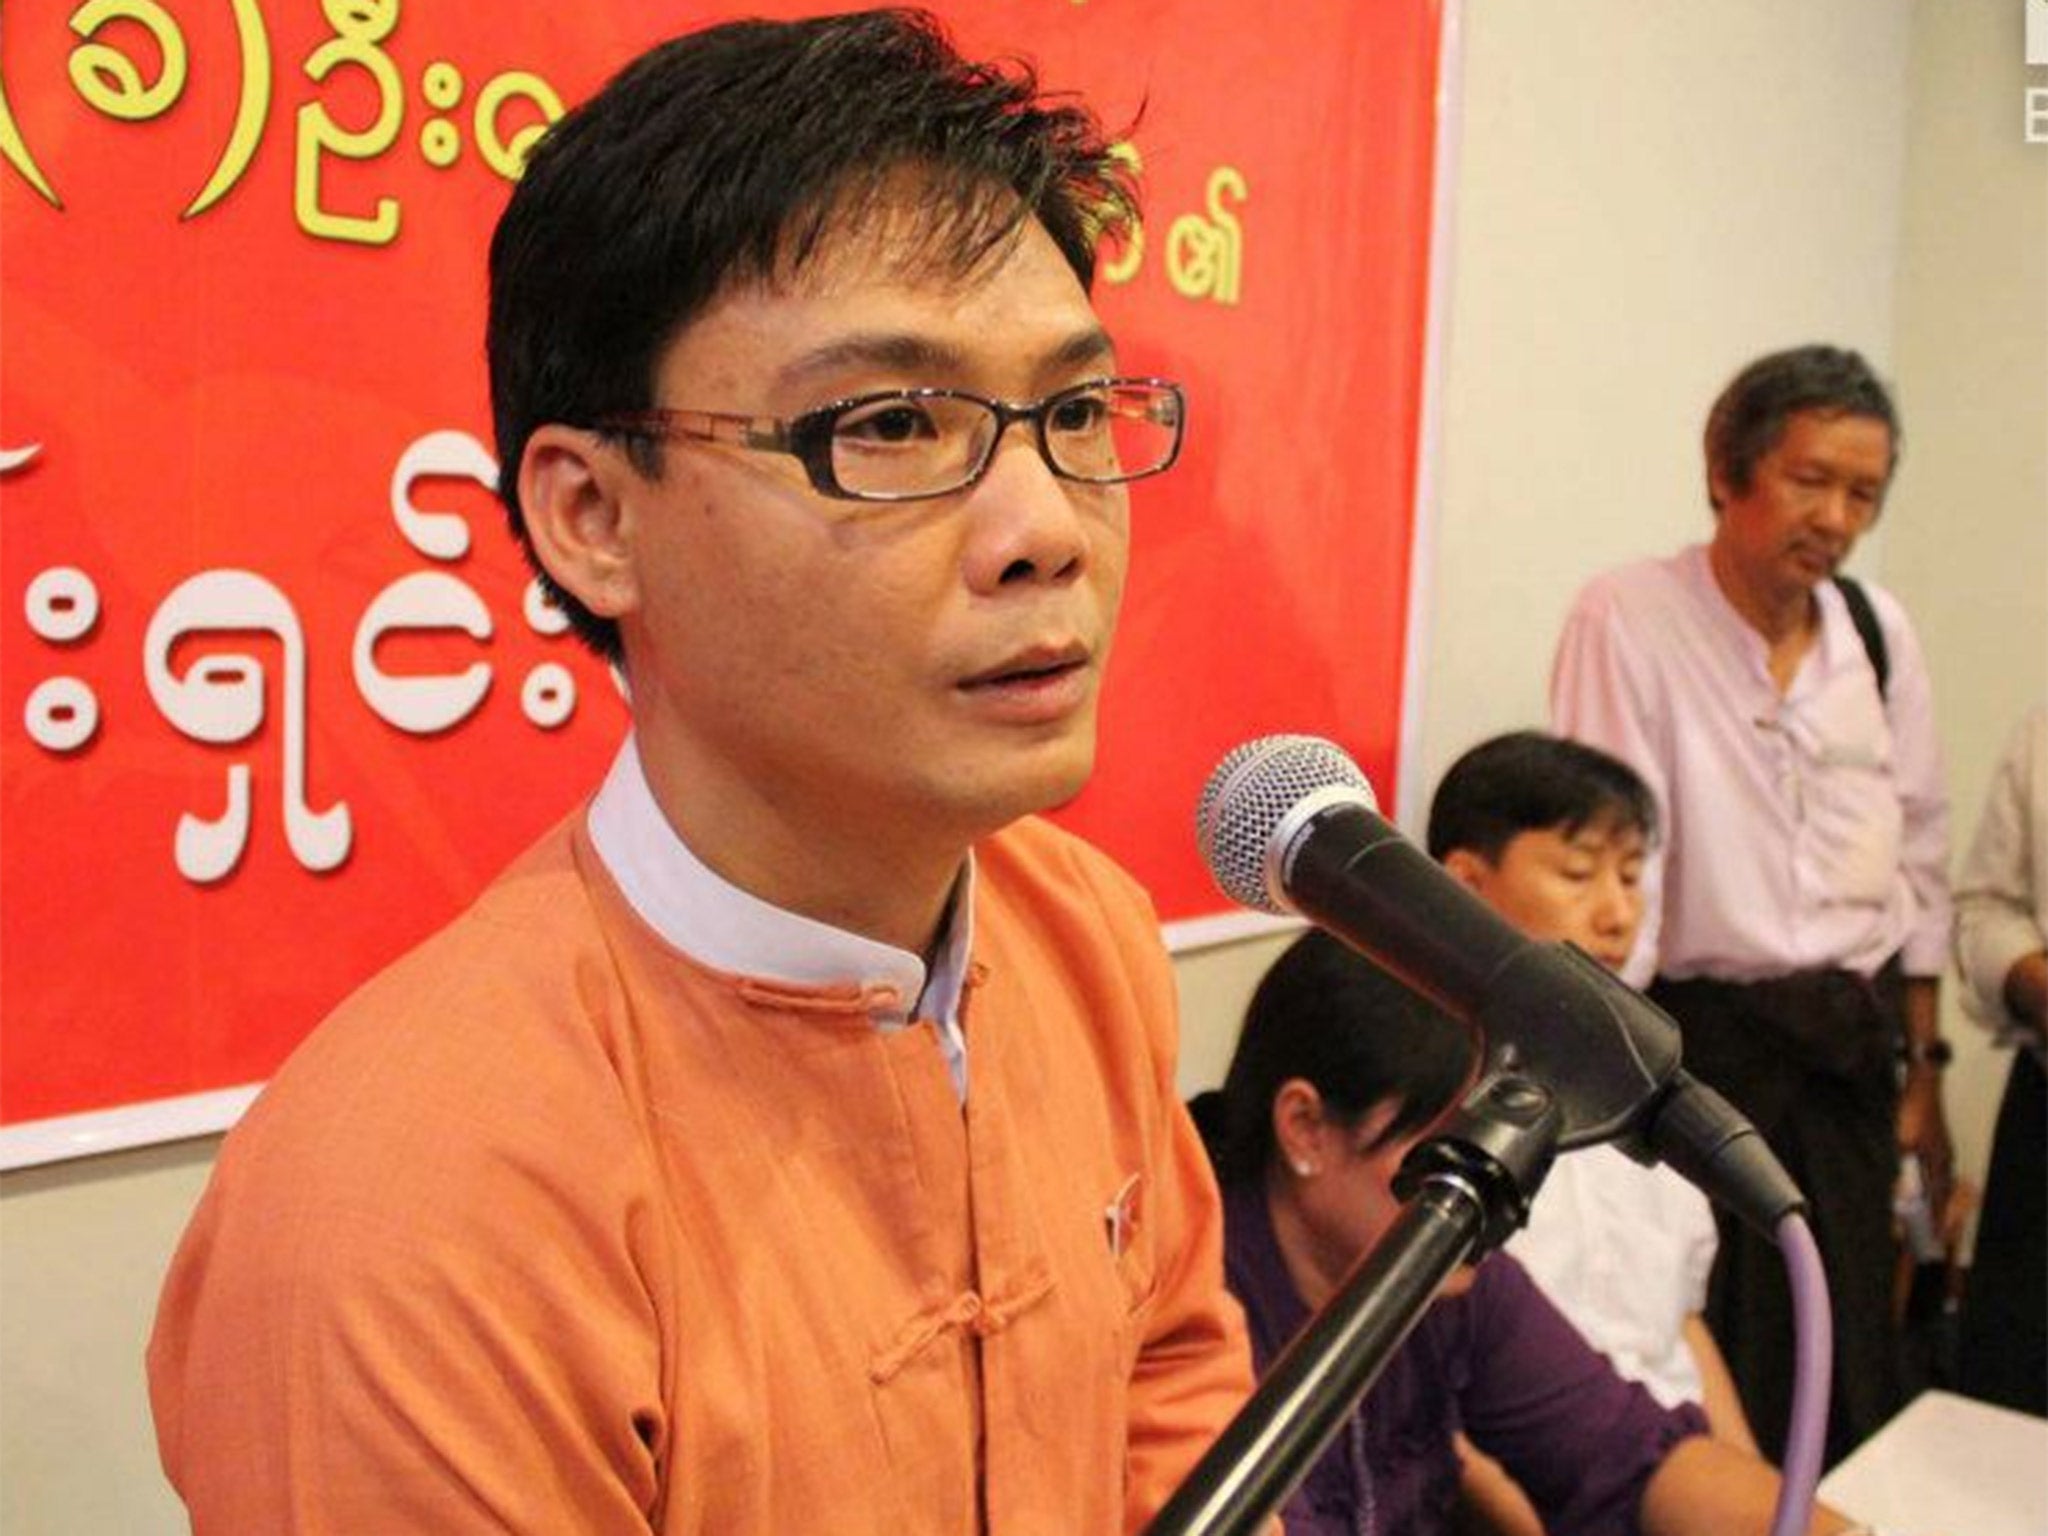 National League for Democracy MP Phyo Zayar Thaw is a former hip-hop artist who spent two and a half years in prison for the perceived anti-government messages of his lyrics